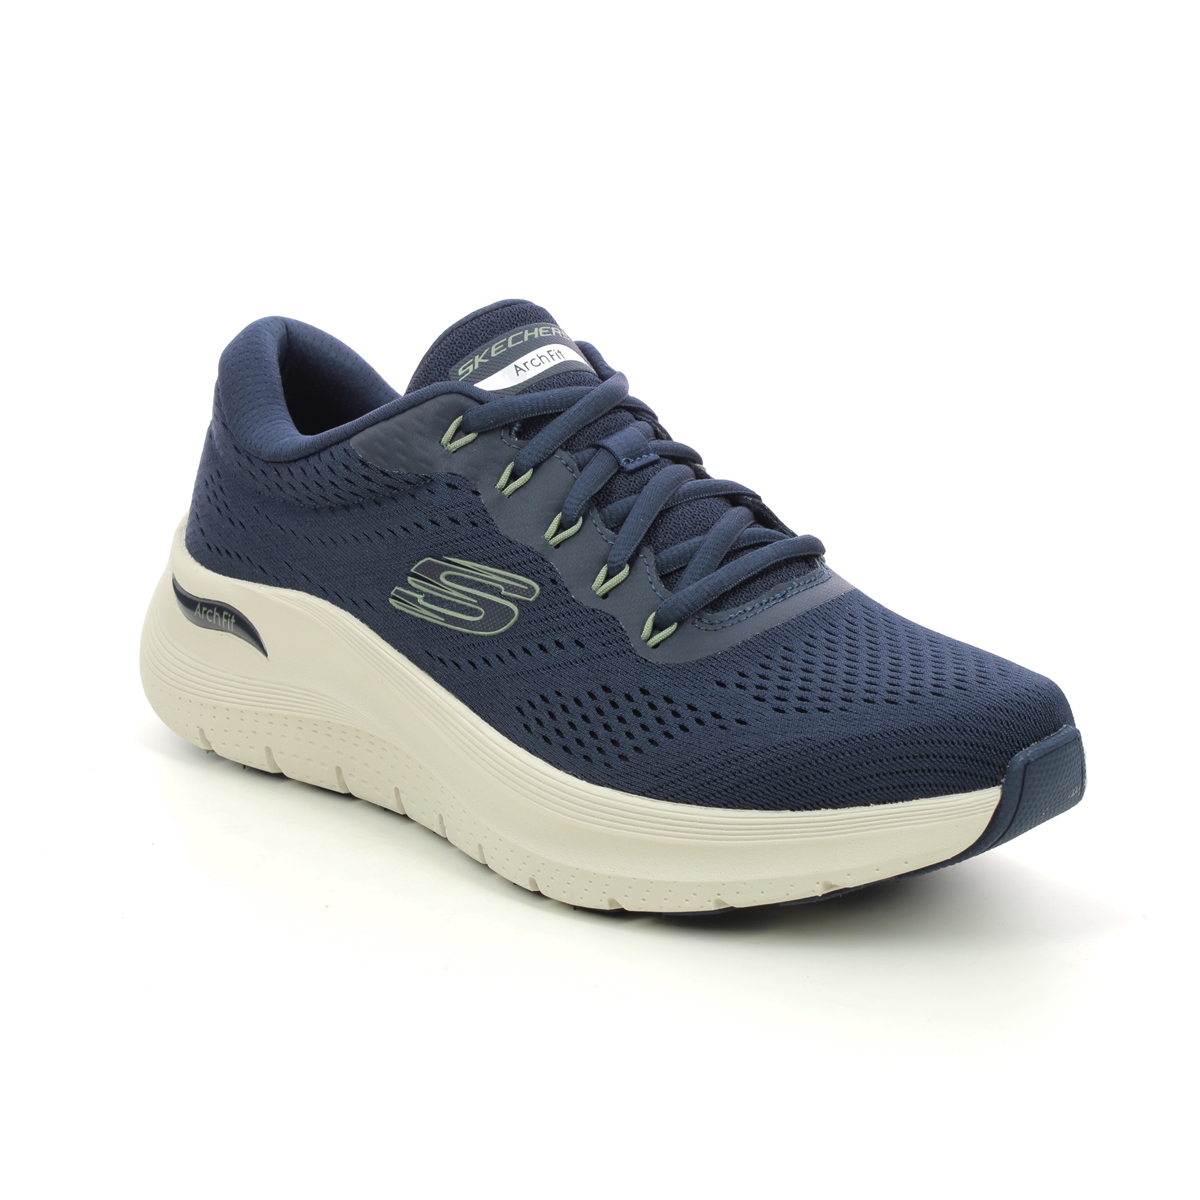 Skechers Arch Fit 2 Lace NVY Navy Mens trainers 232700 in a Plain Textile in Size 7